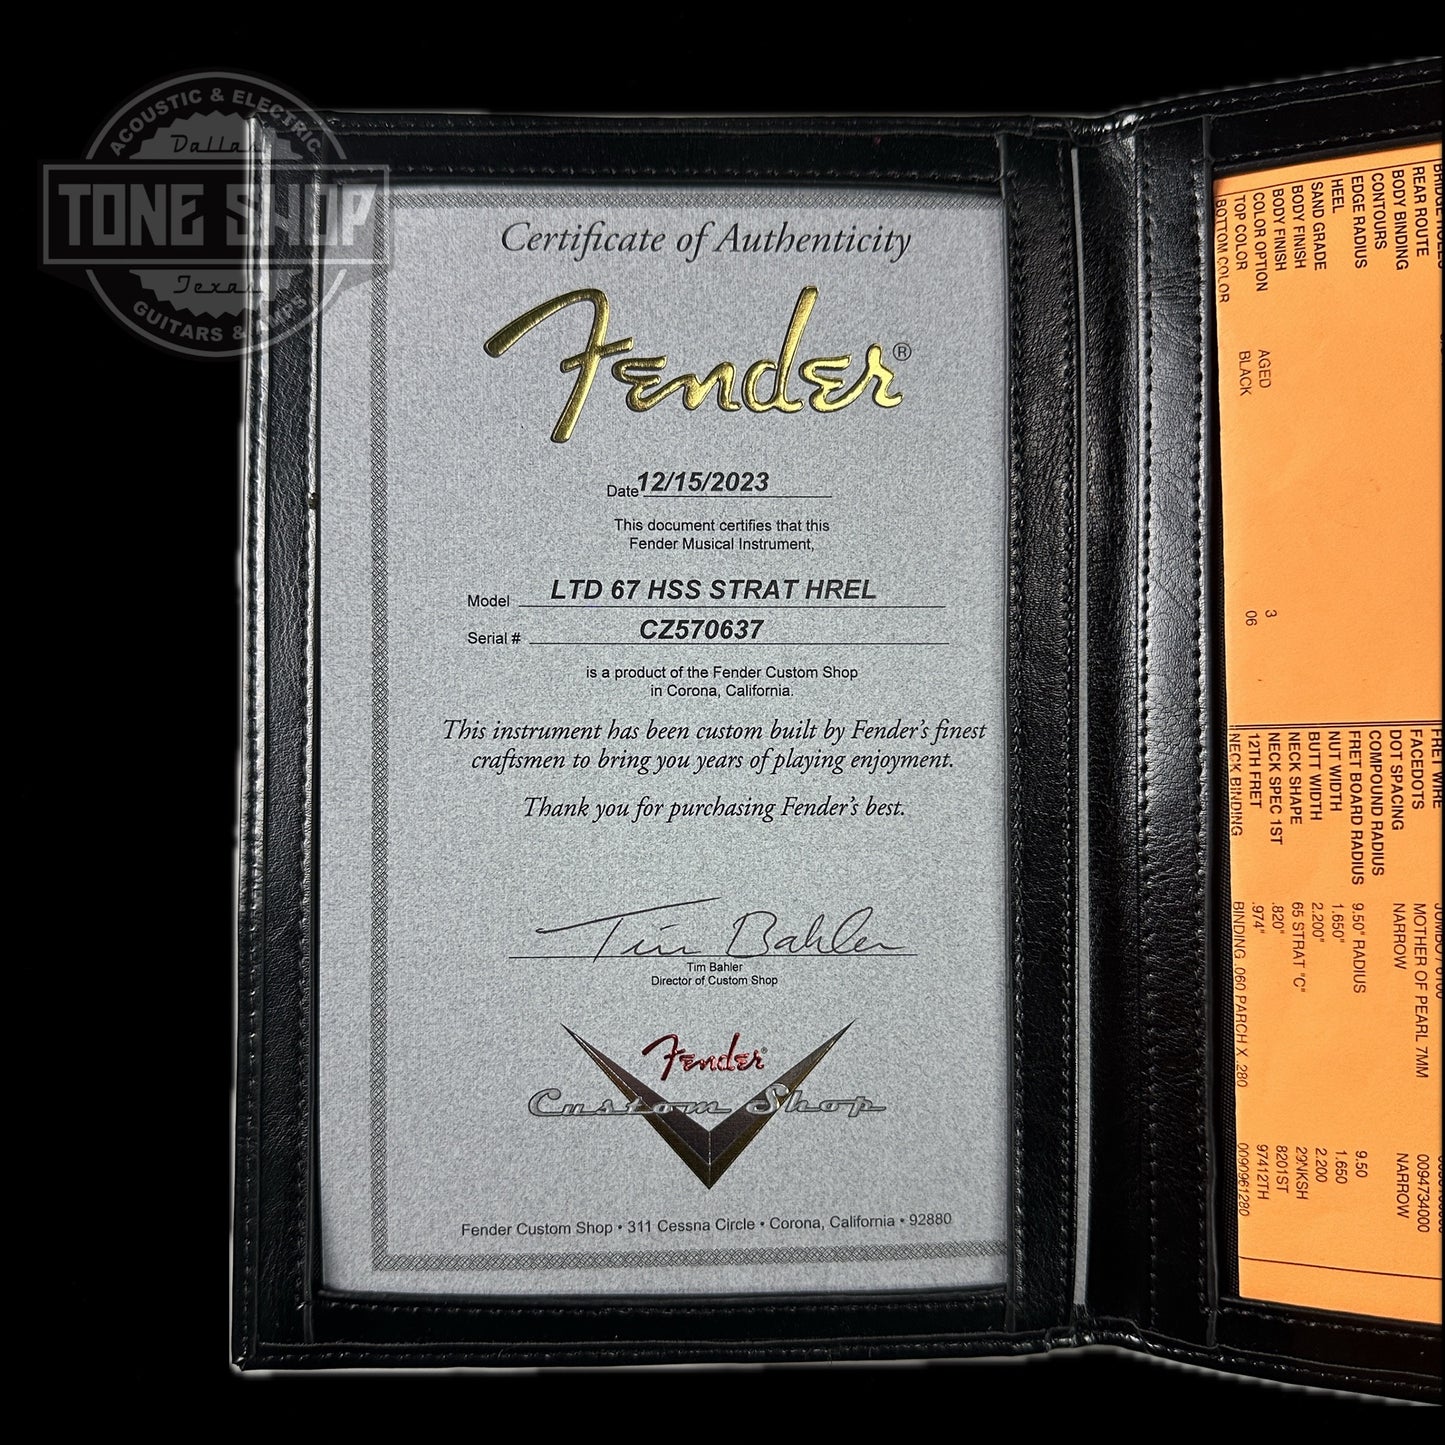 Certificate of authenticity for Fender Custom Shop Limited Edition '67 Hss Strat Heavy Relic Aged Black.